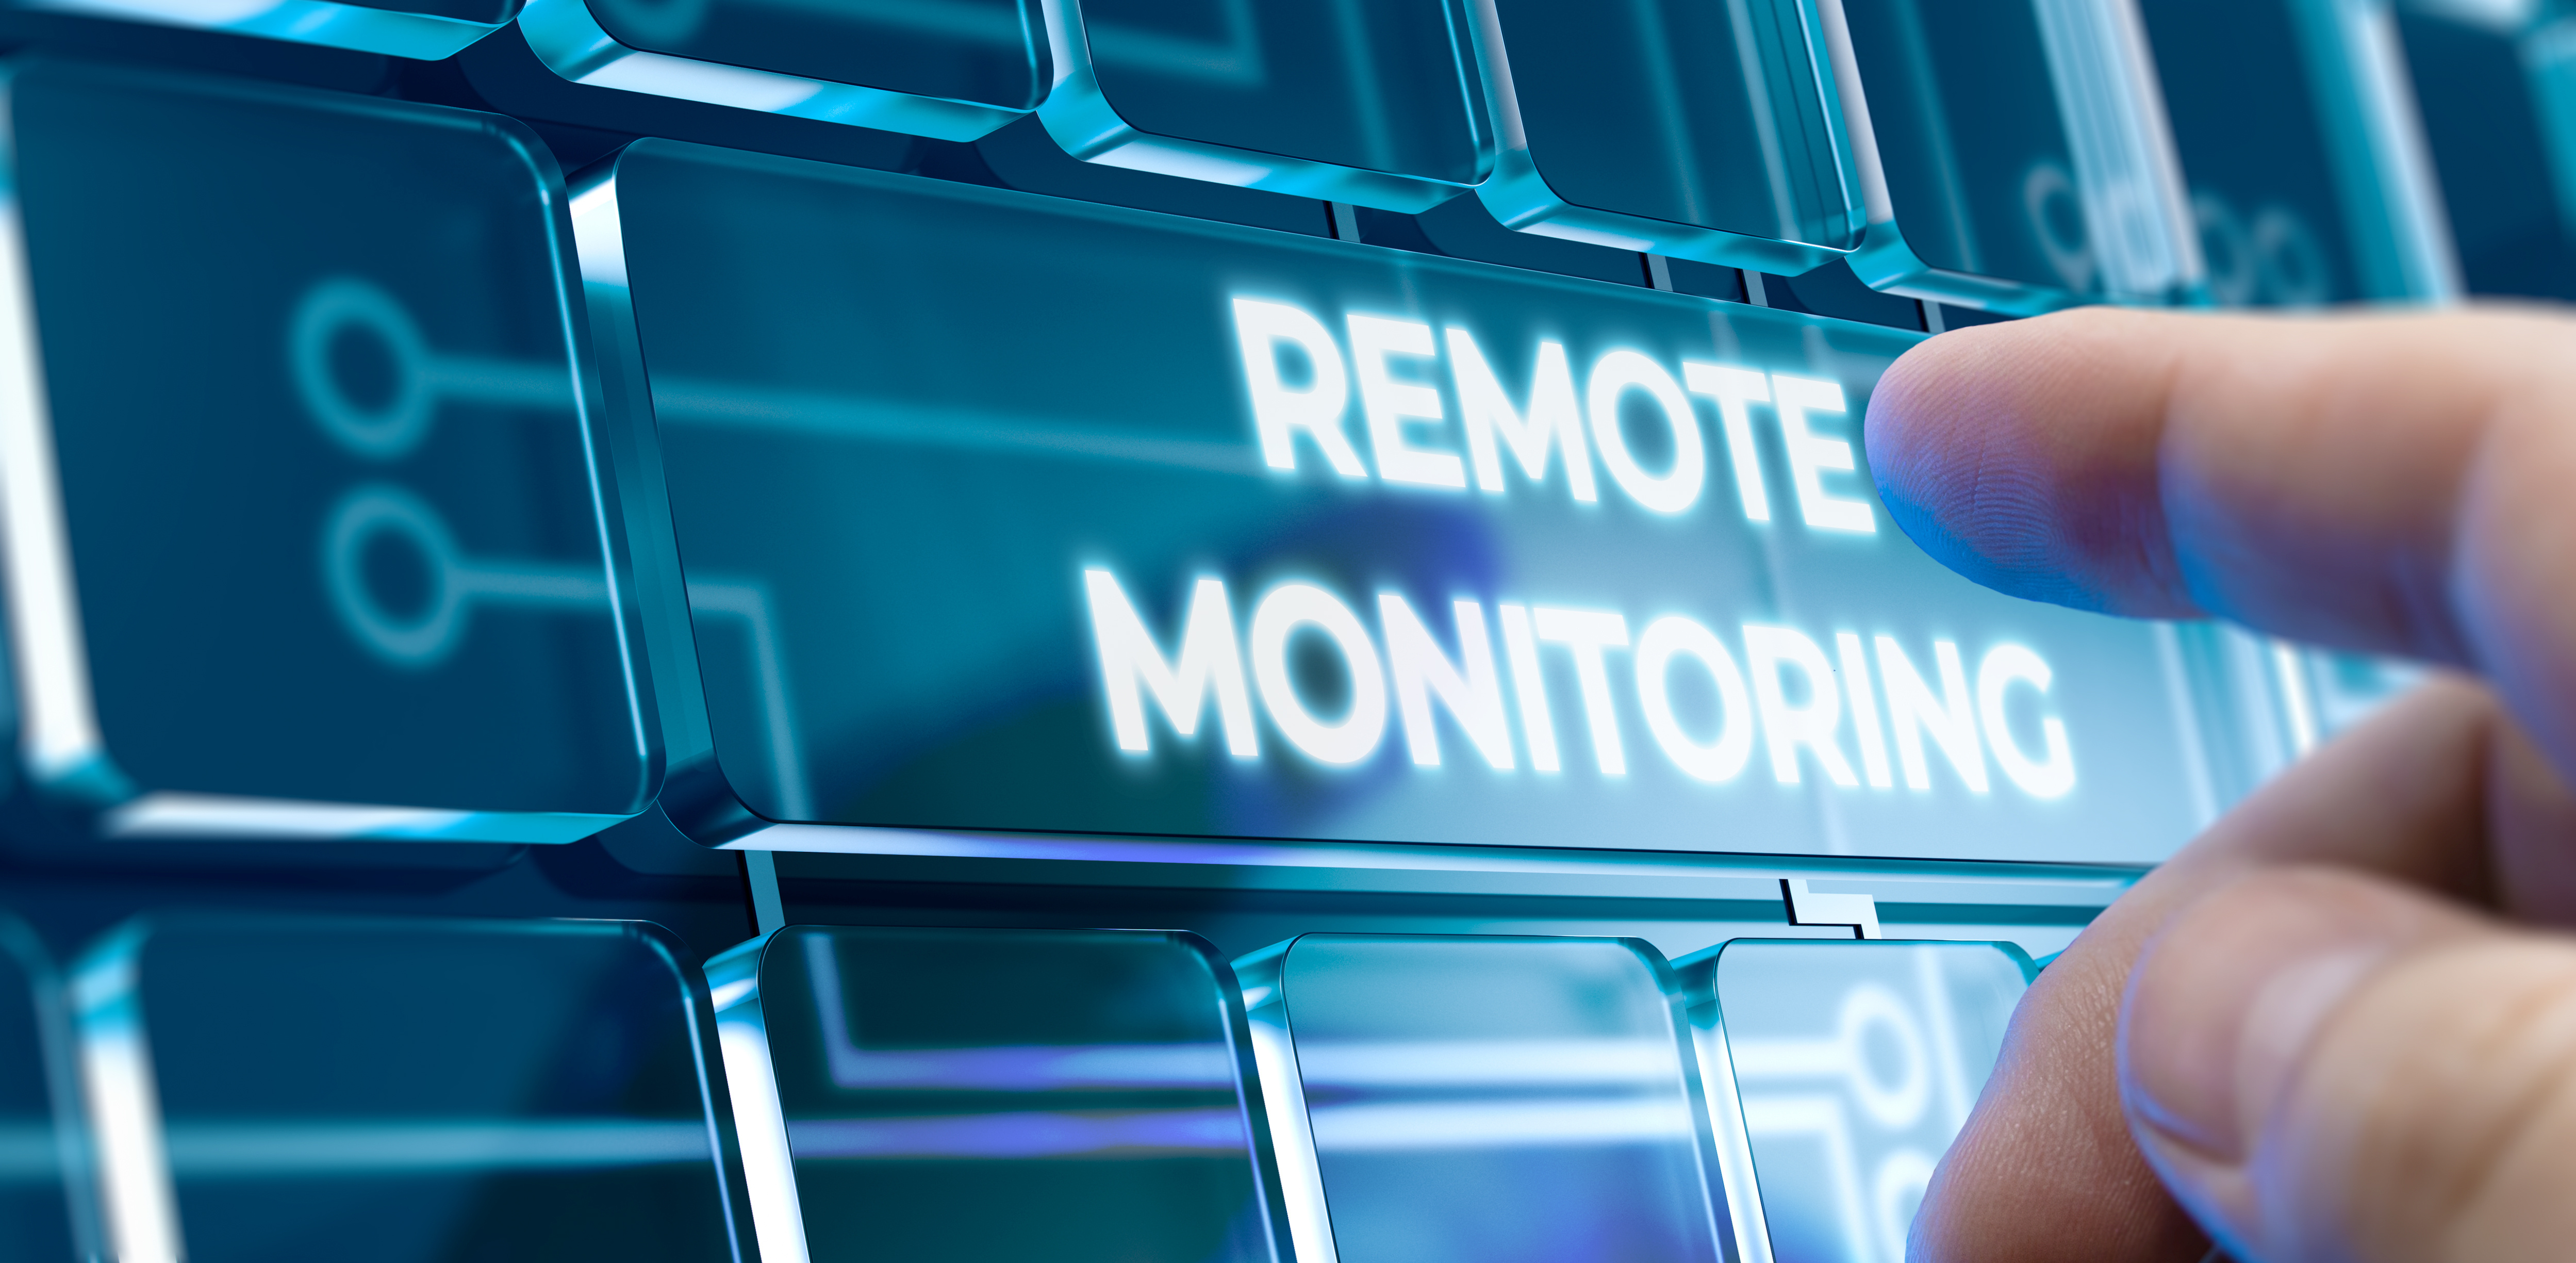 Deka Duration: The Benefits of Remote Monitoring